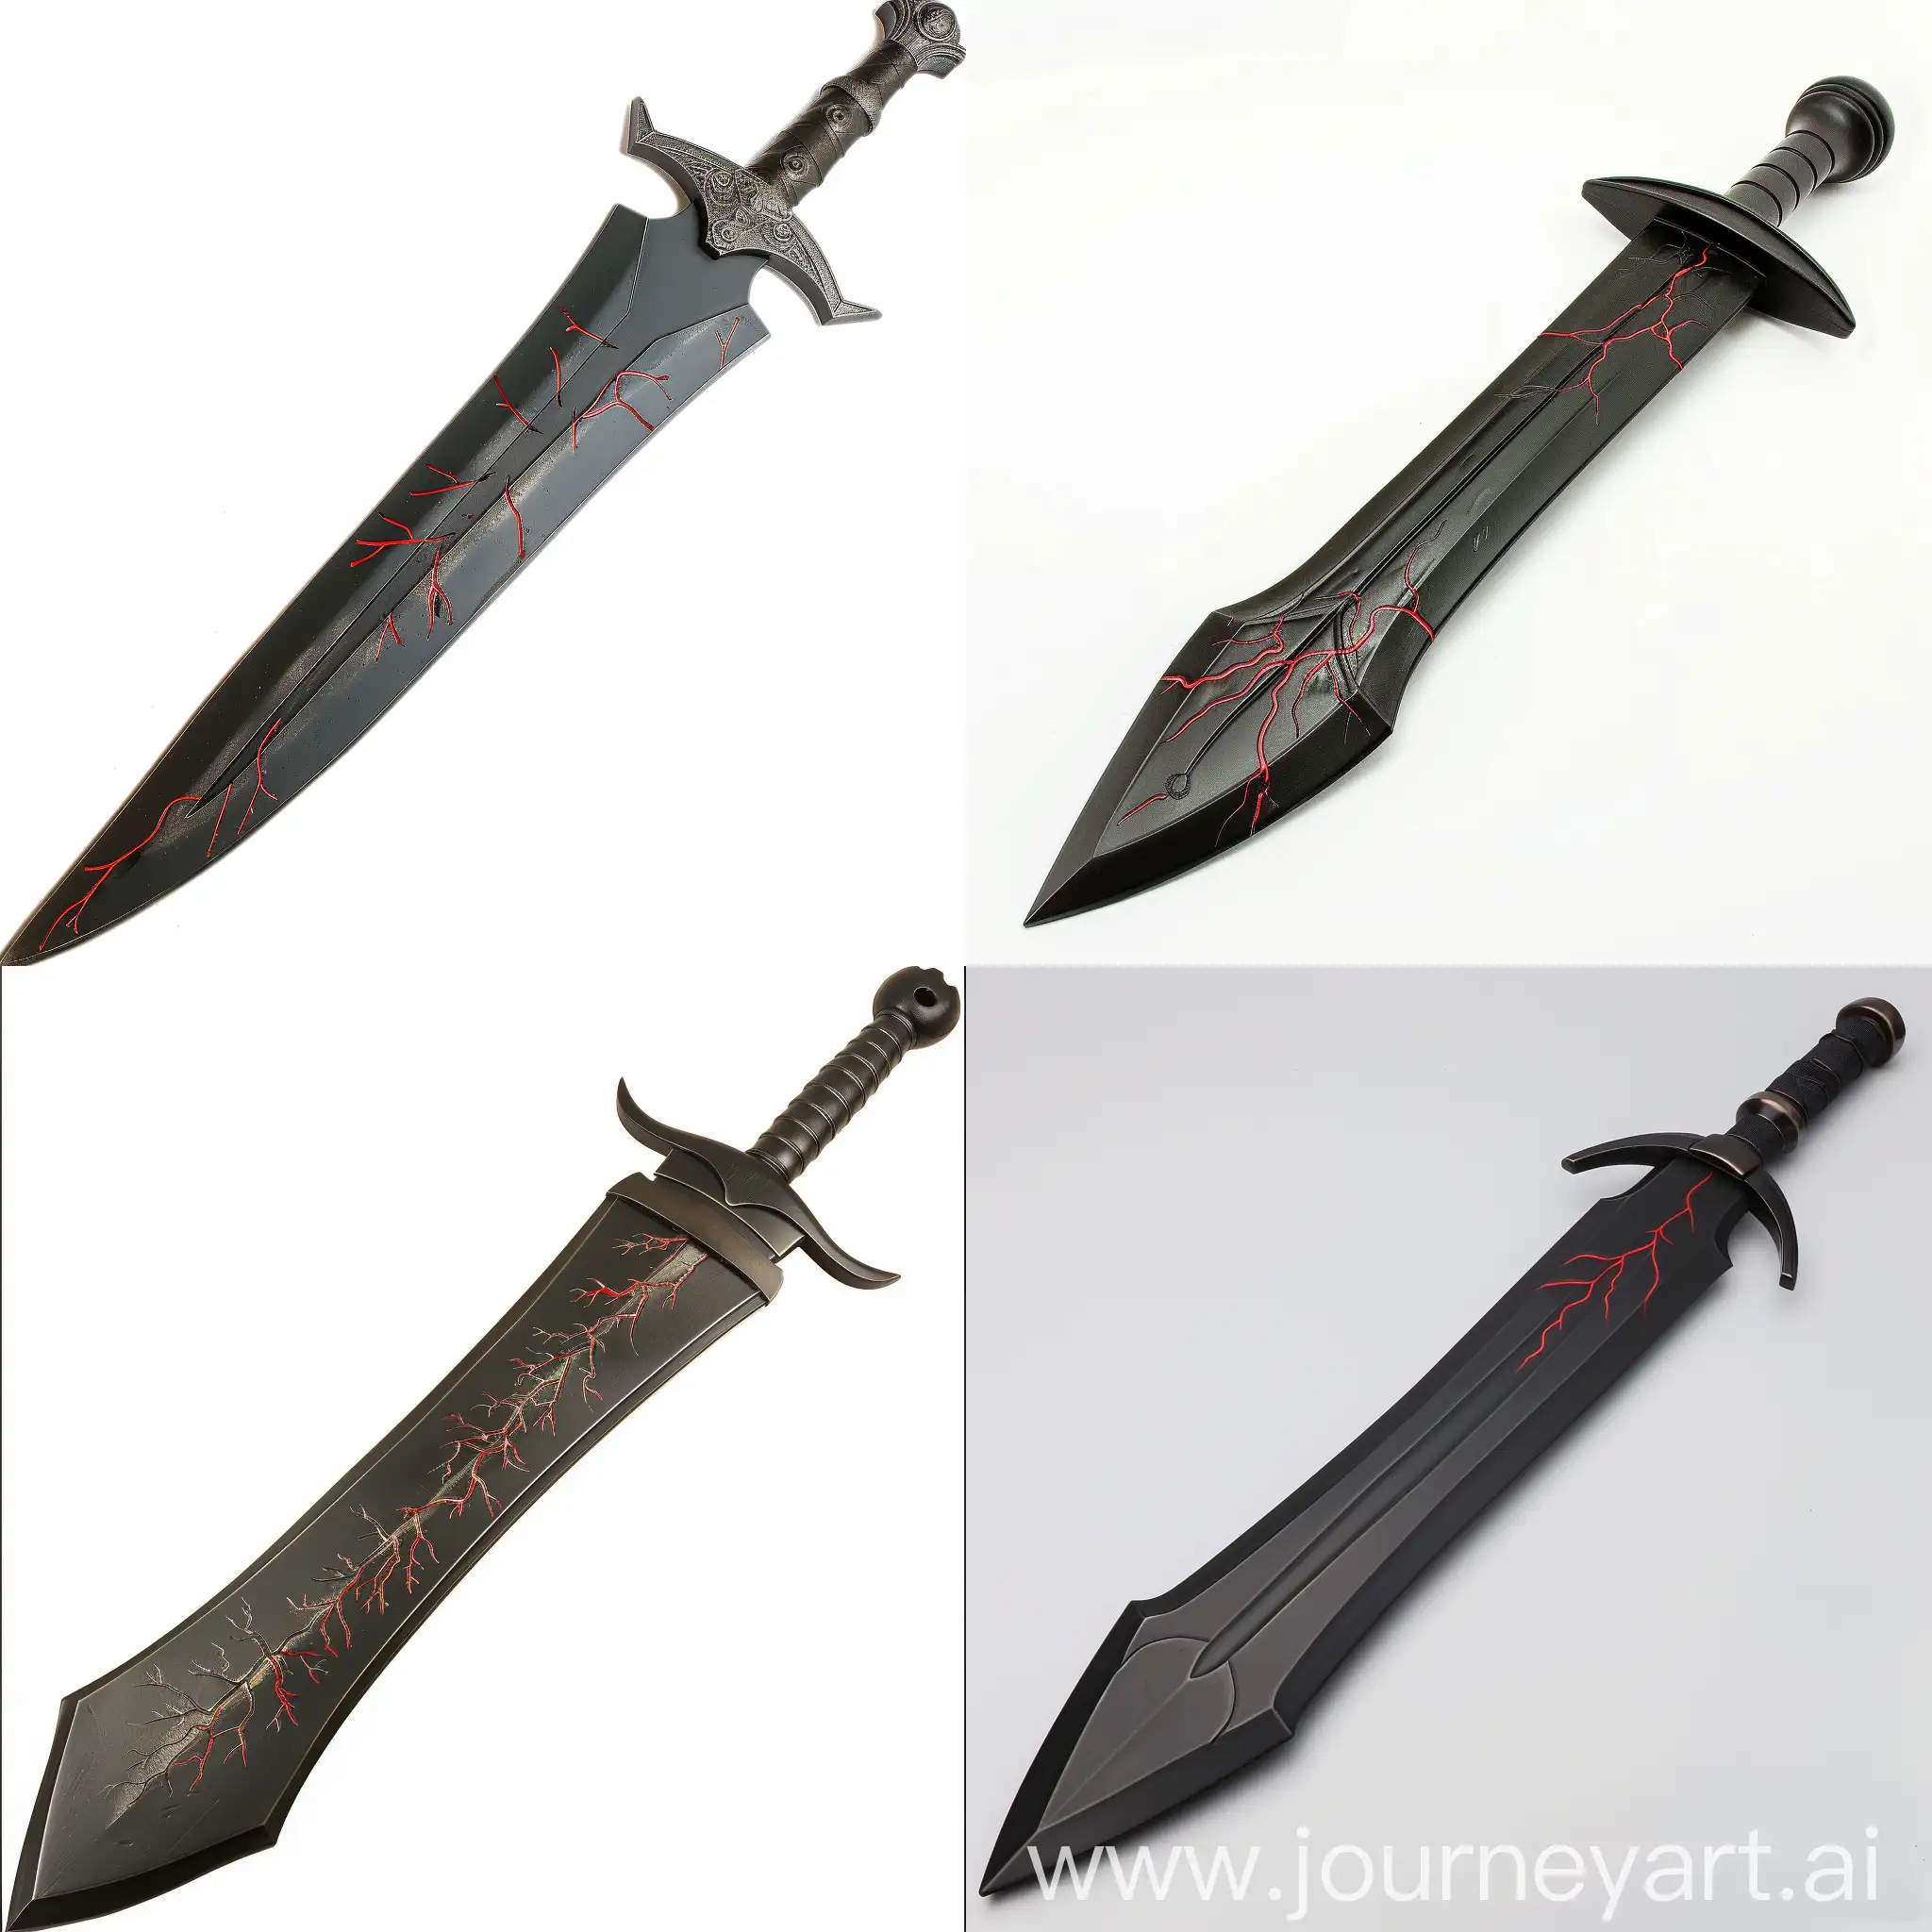 Black-Gladius-Sword-with-Red-Veins-Ancient-Weapon-Replica-Art